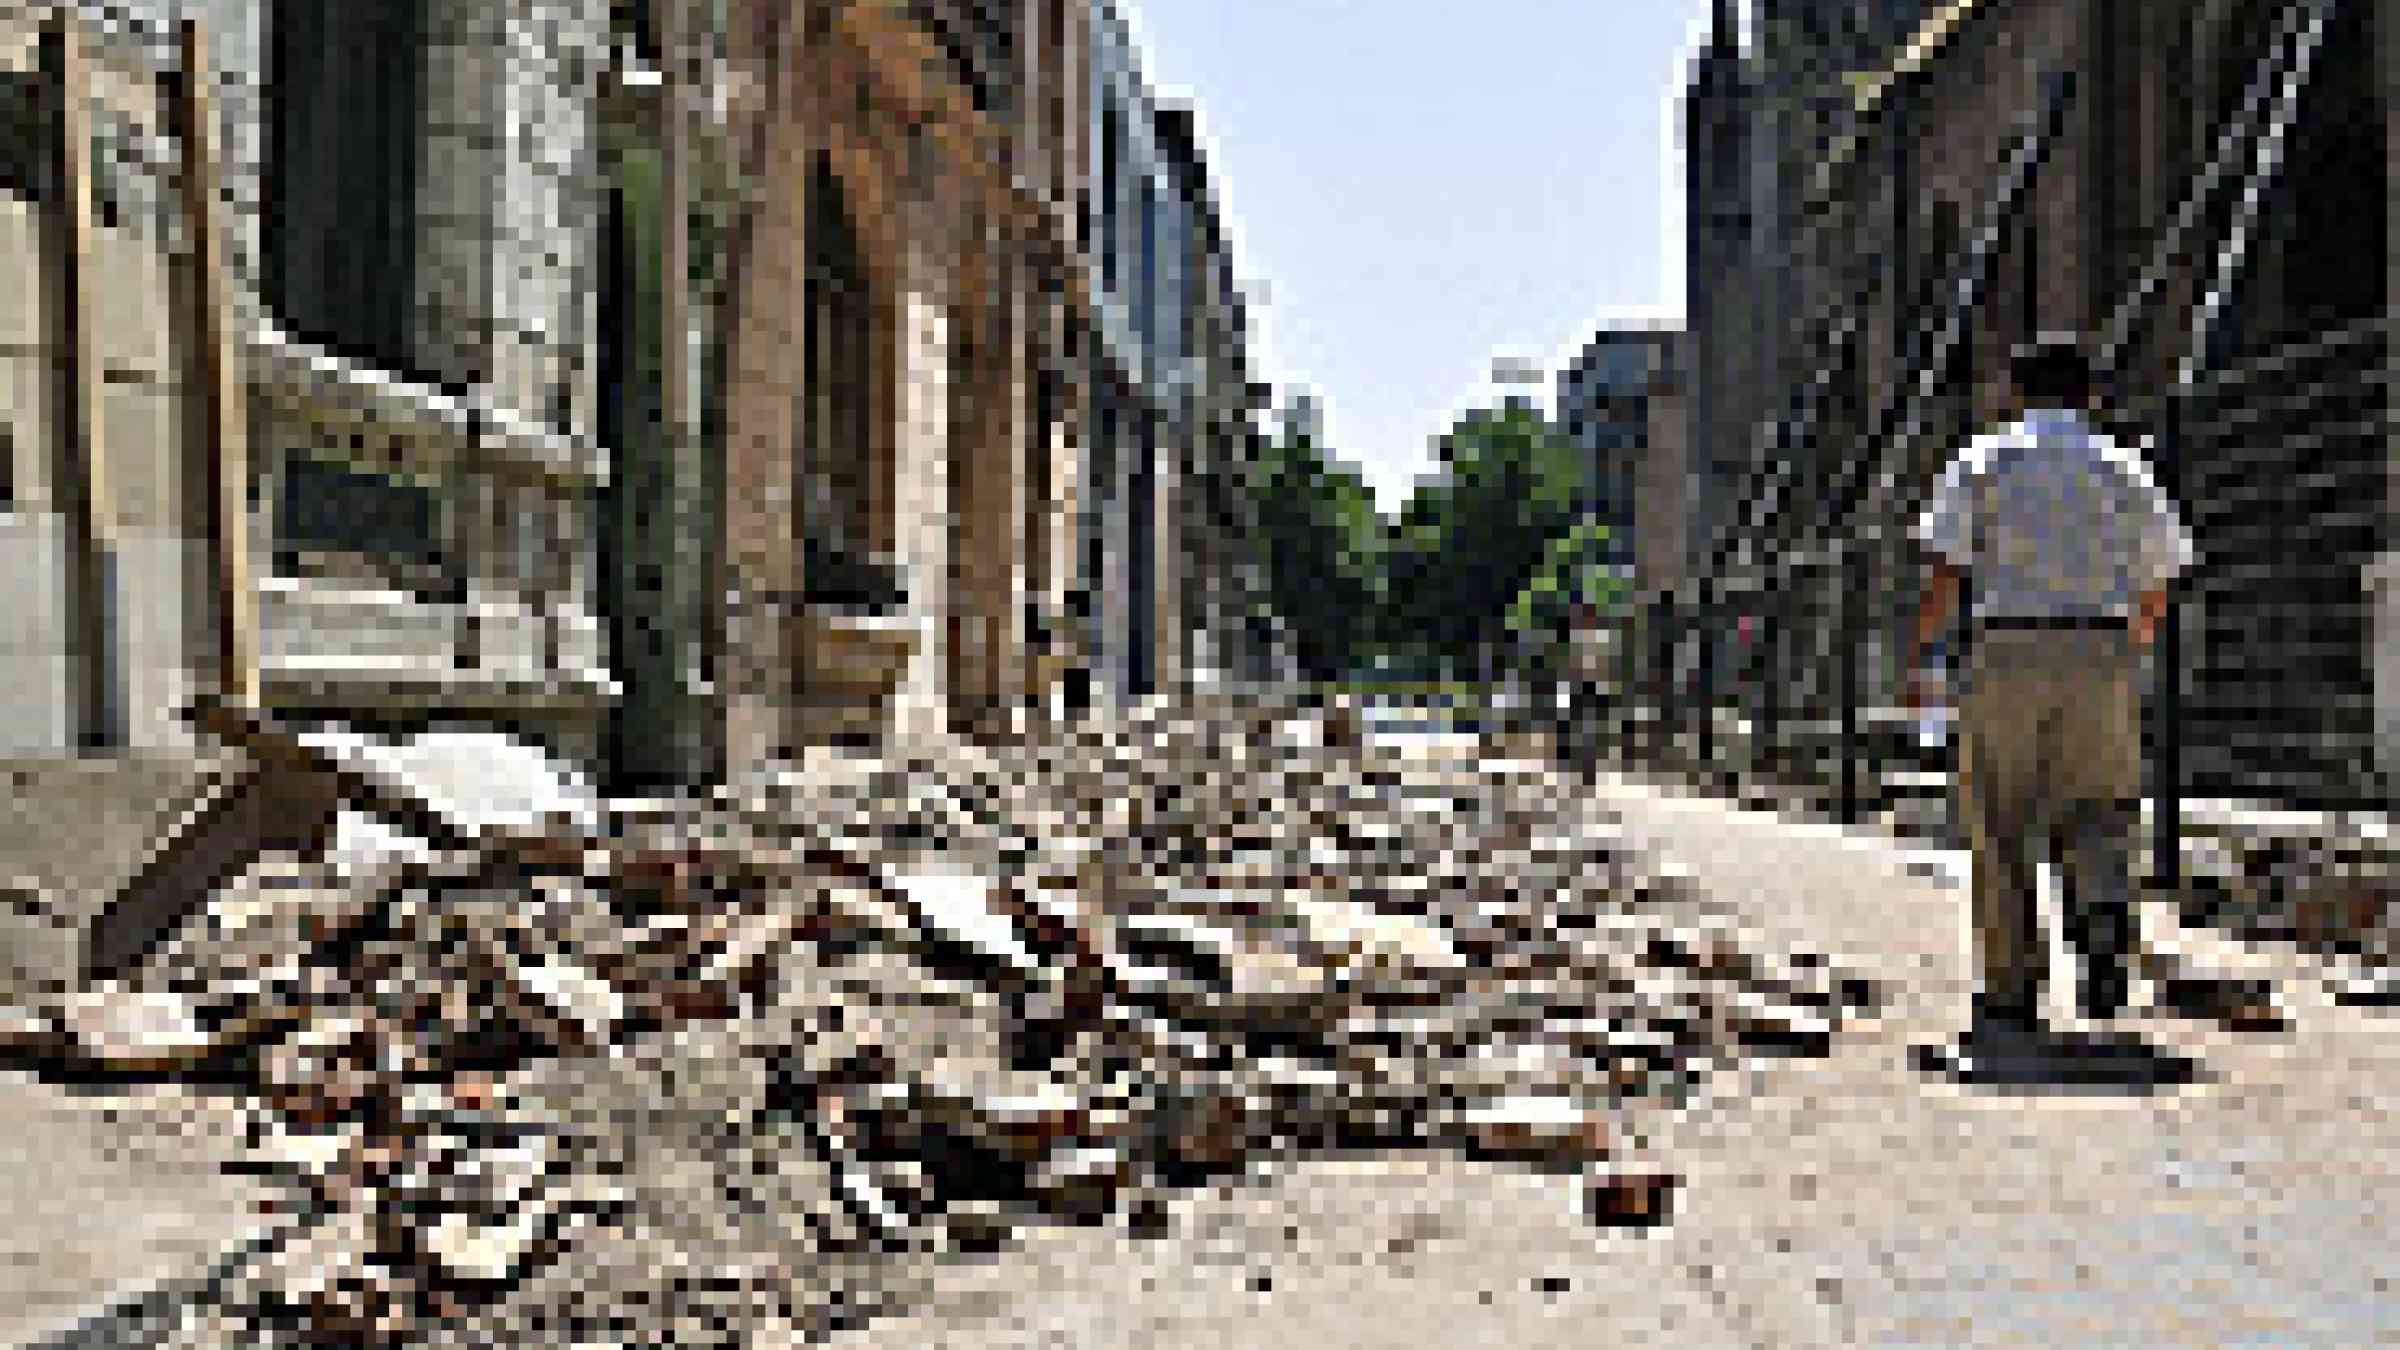 Photo of the debris from Chilean earthquake by Flickr user Luis Ittura Creative Commons Attribution-Noncommercial 2.0 Generic http://www.flickr.com/photos/liturra/4396684367/